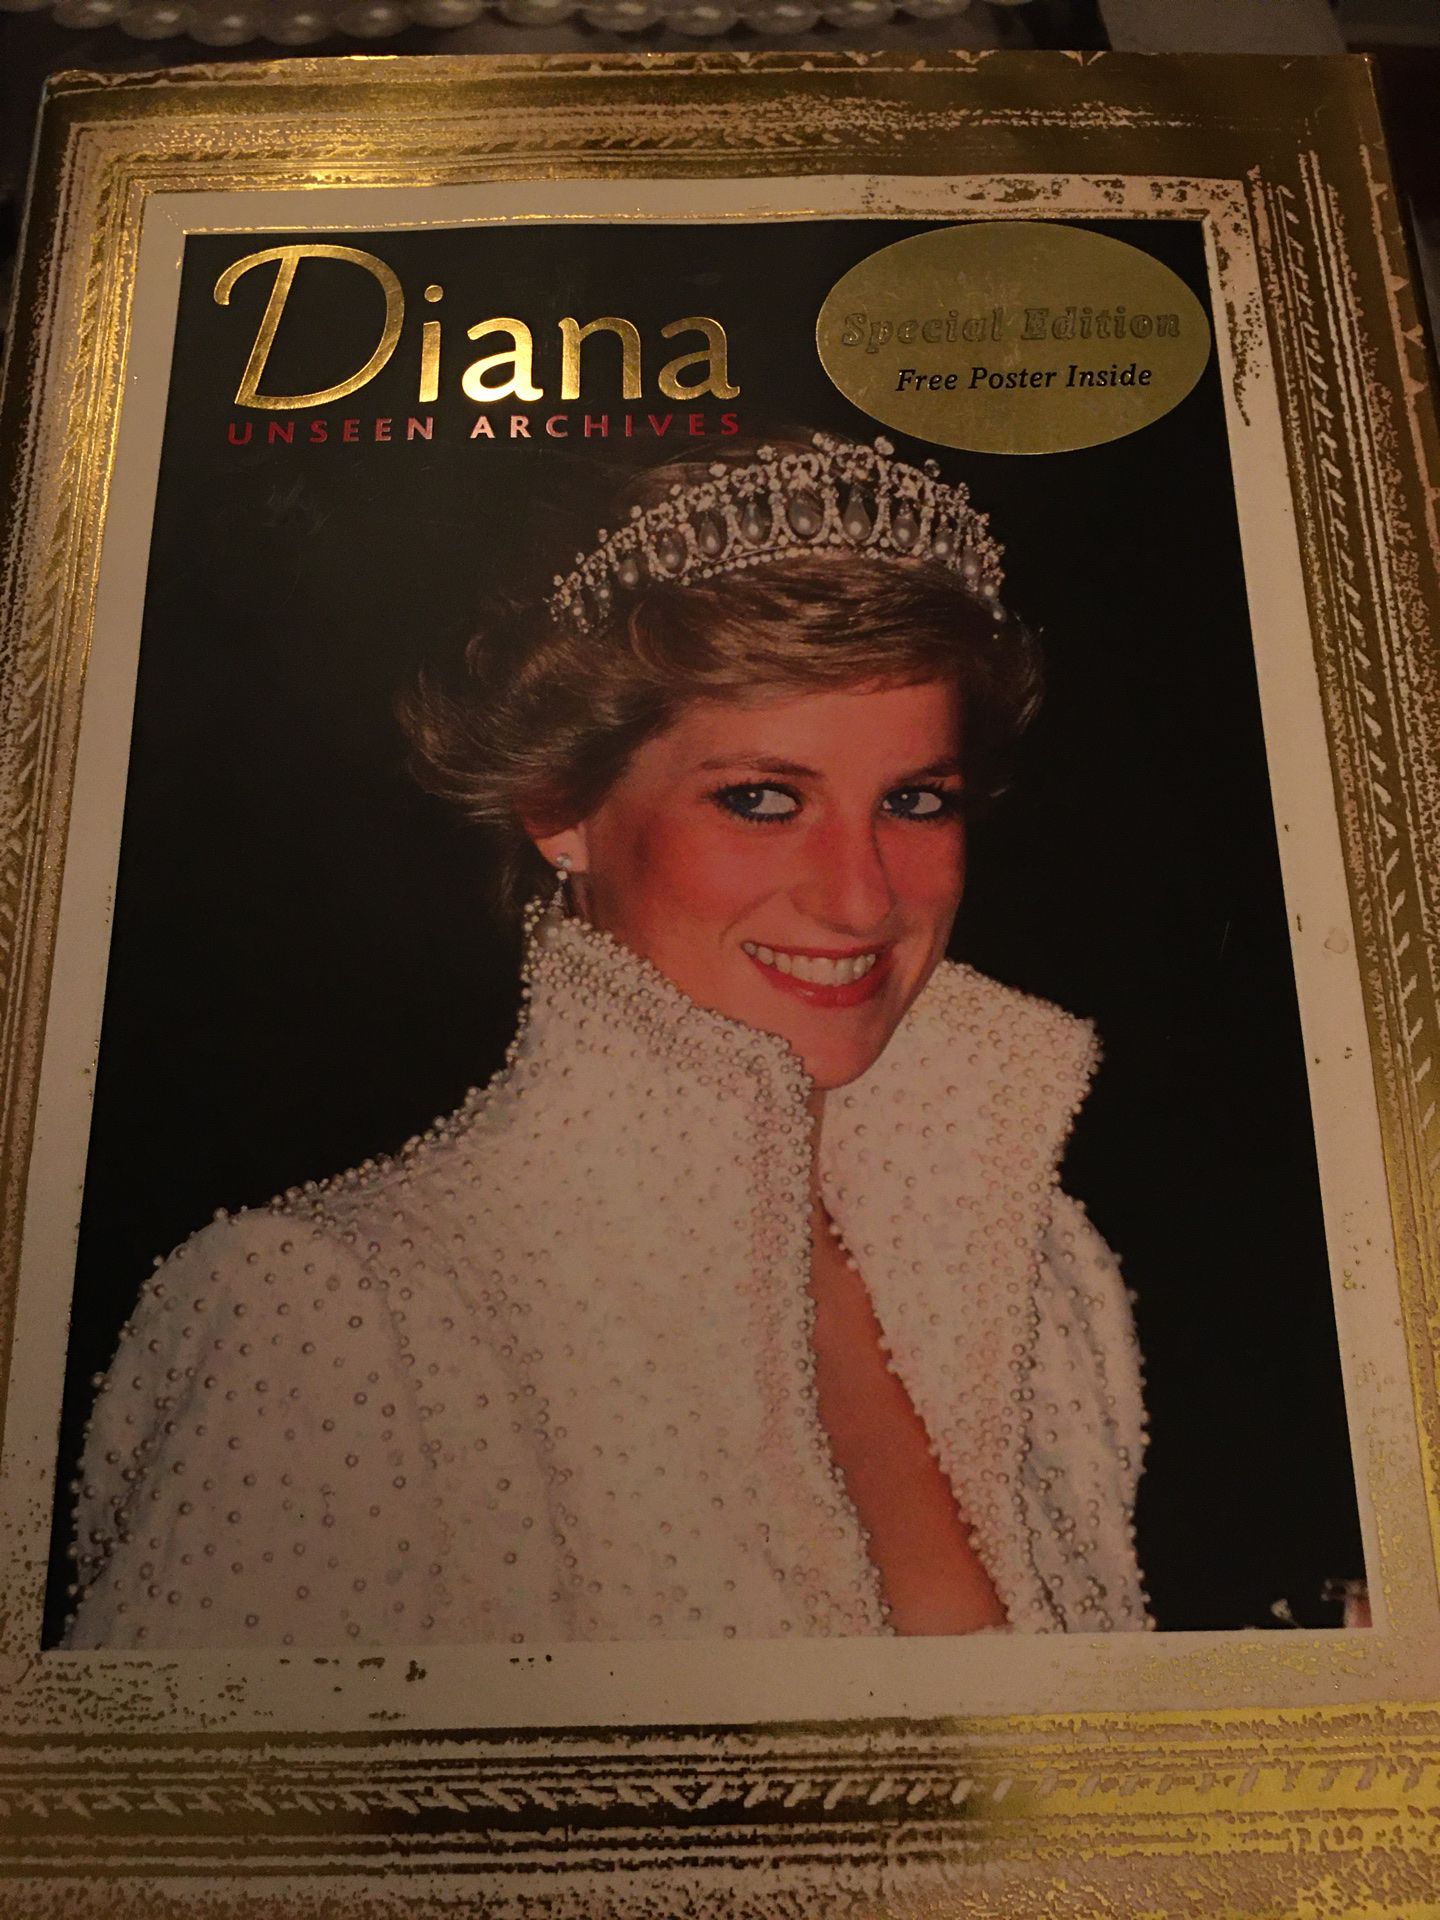 Diana unseen archives book..from early years to her death